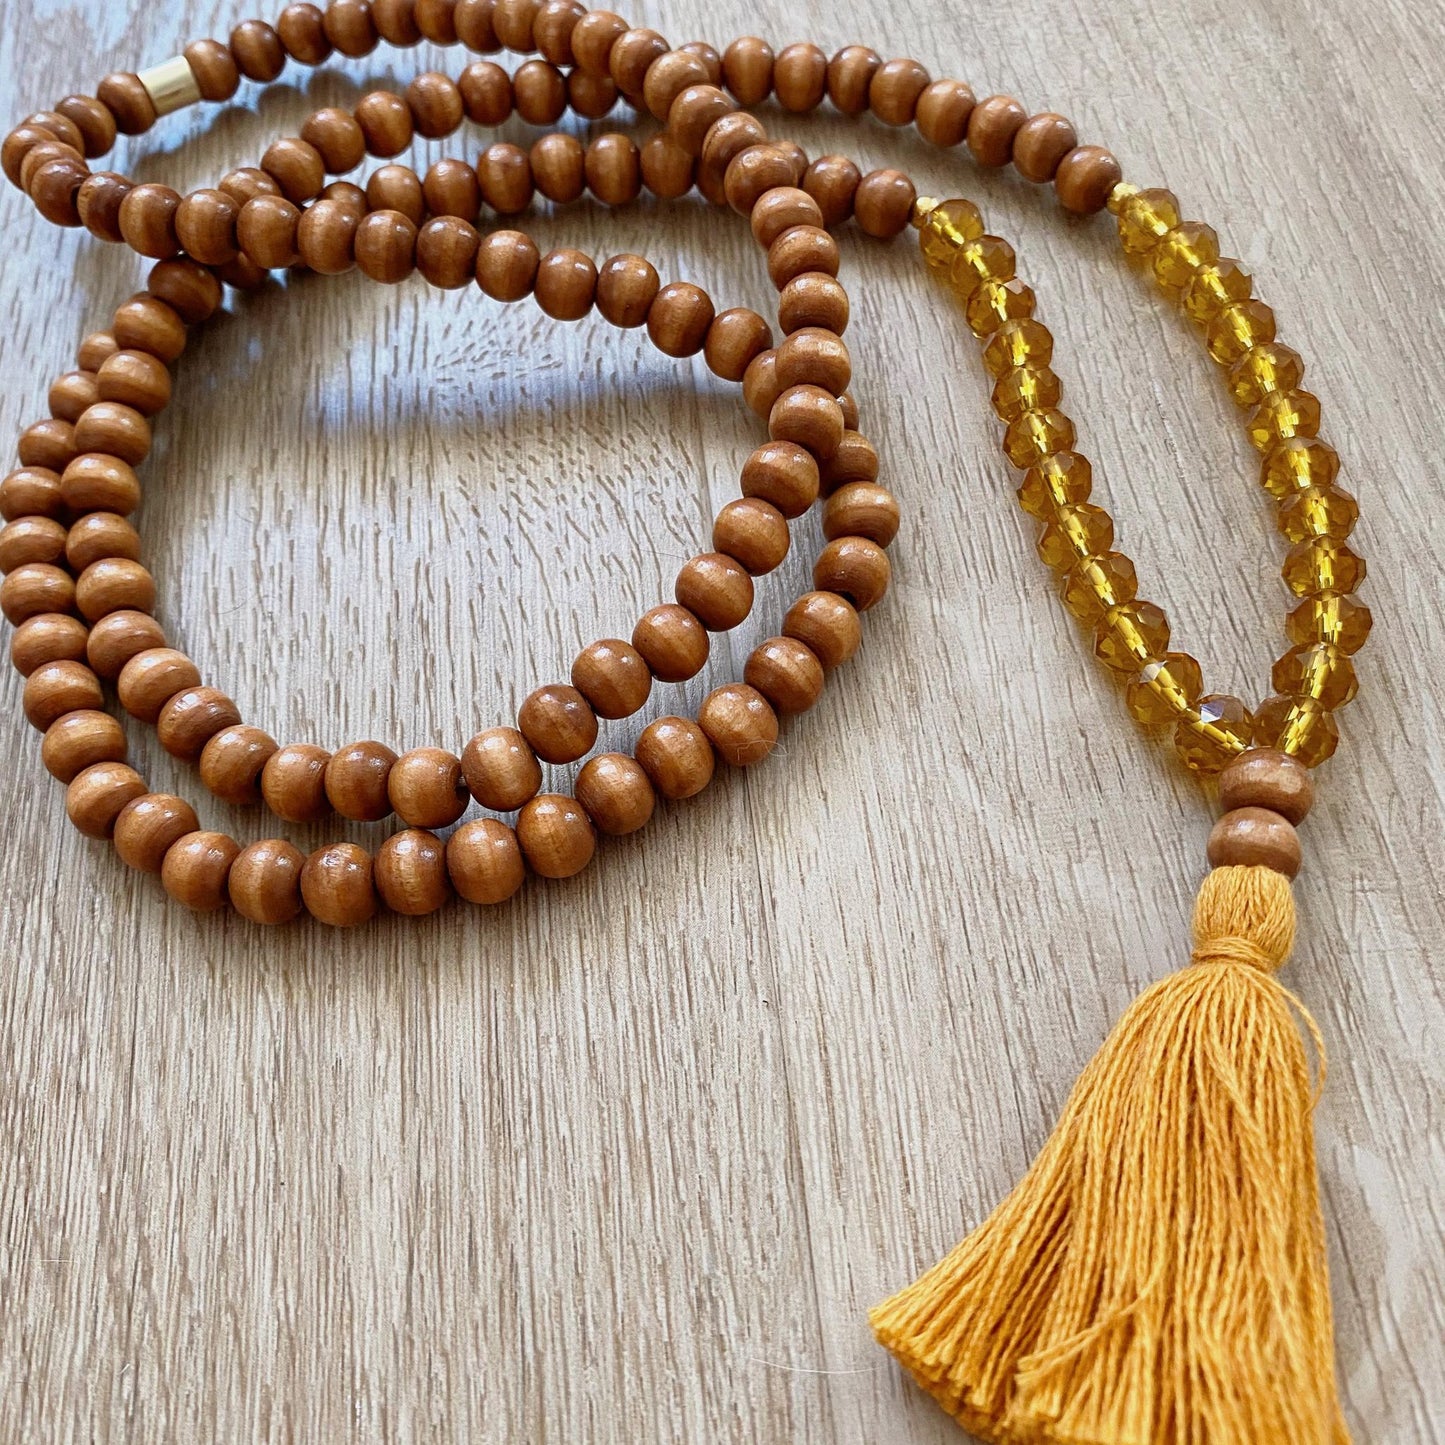 real wooden beads, long pendant tassel necklace with amber glass beads